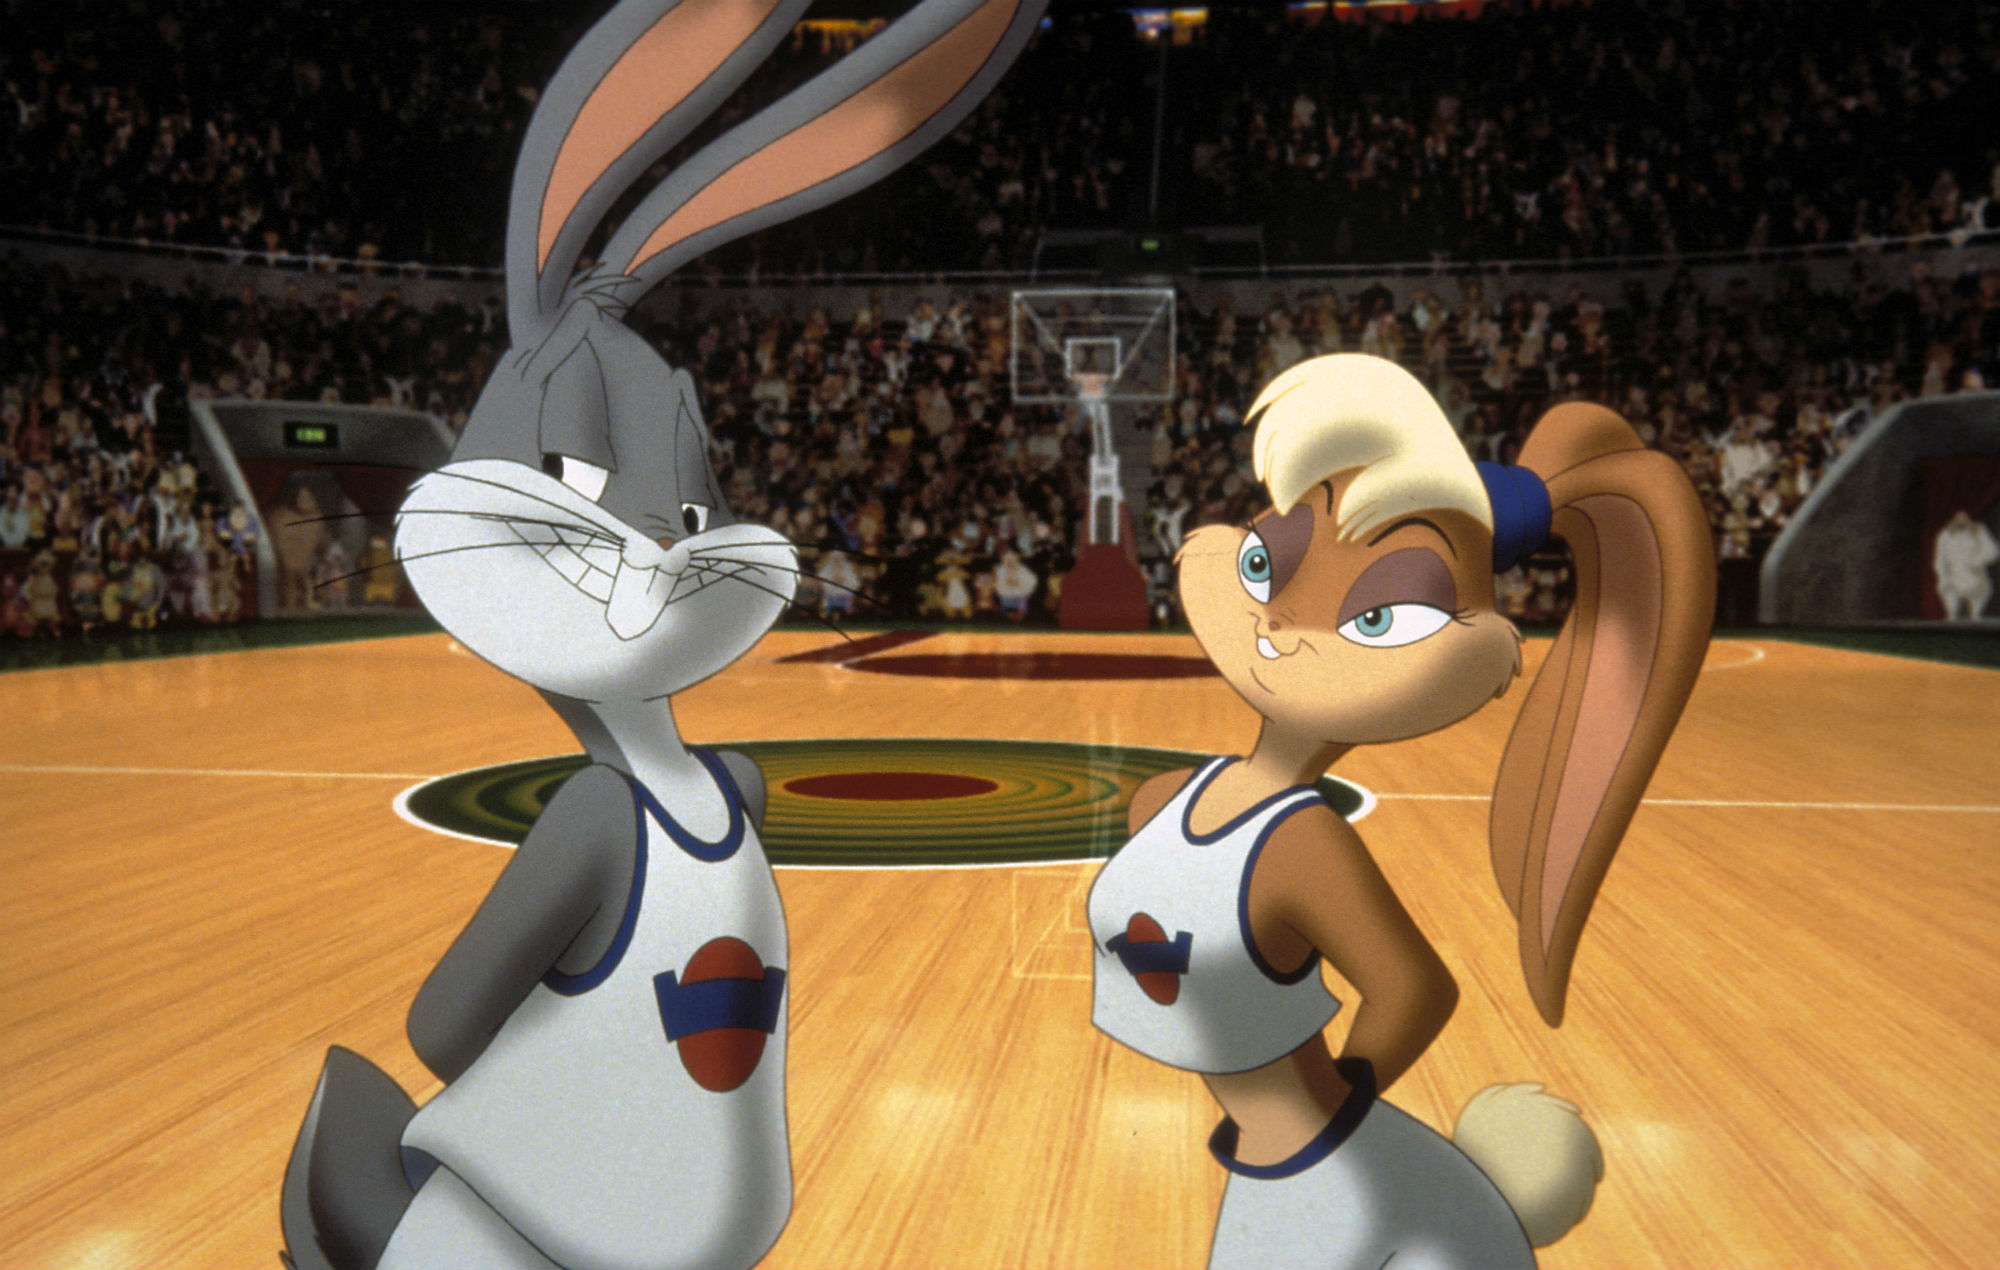 movies ruined with sex scenes - Space Jam